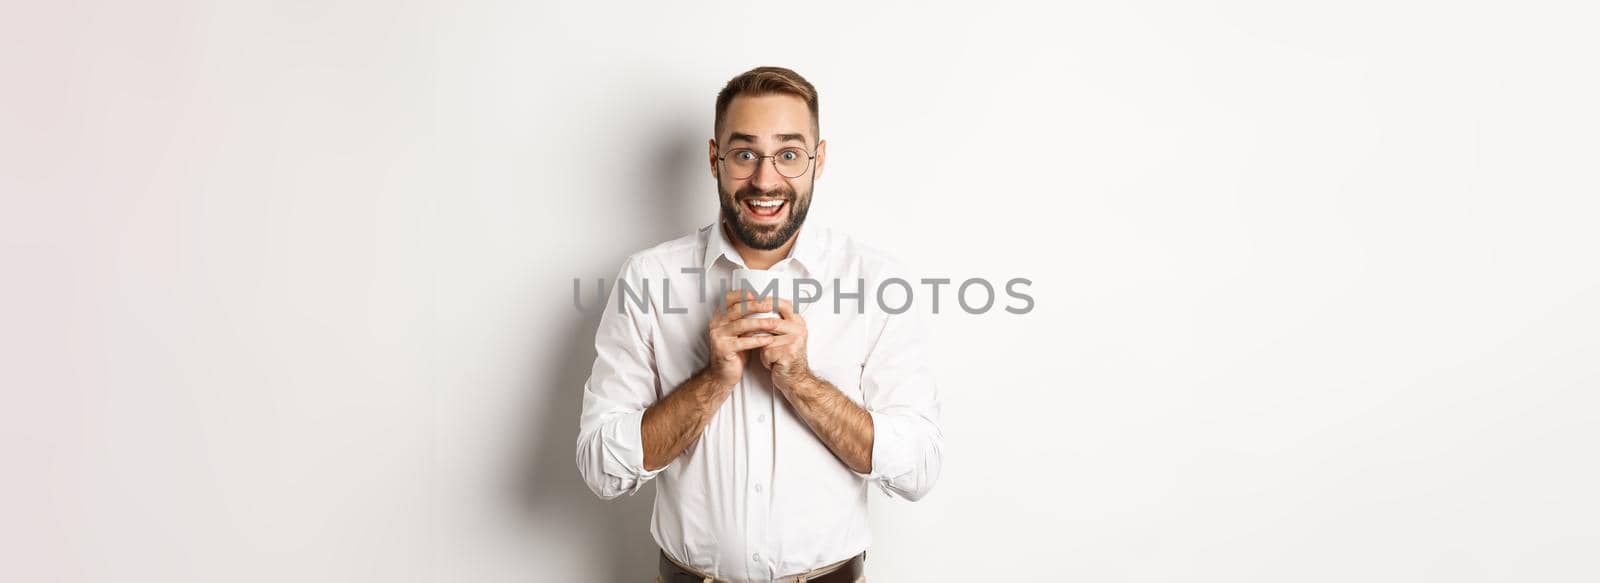 Man drinking coffee and looking excited, enjoying drink, standing over white background.